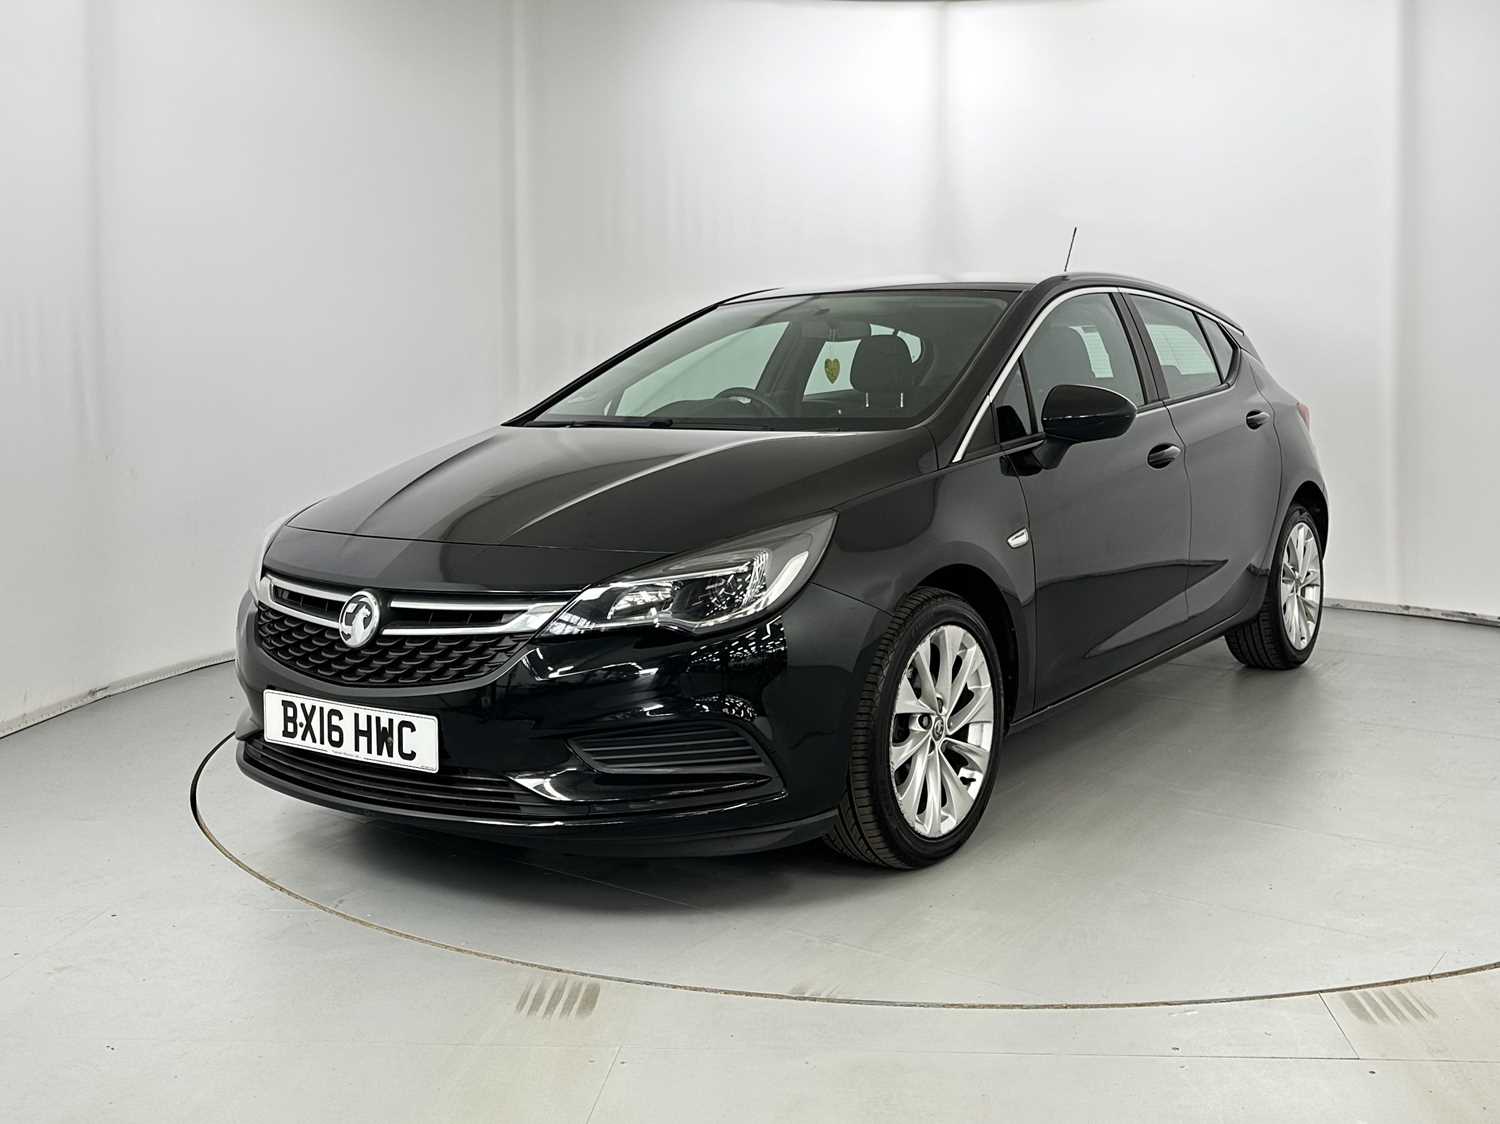 2016 Vauxhall Astra - Image 3 of 34